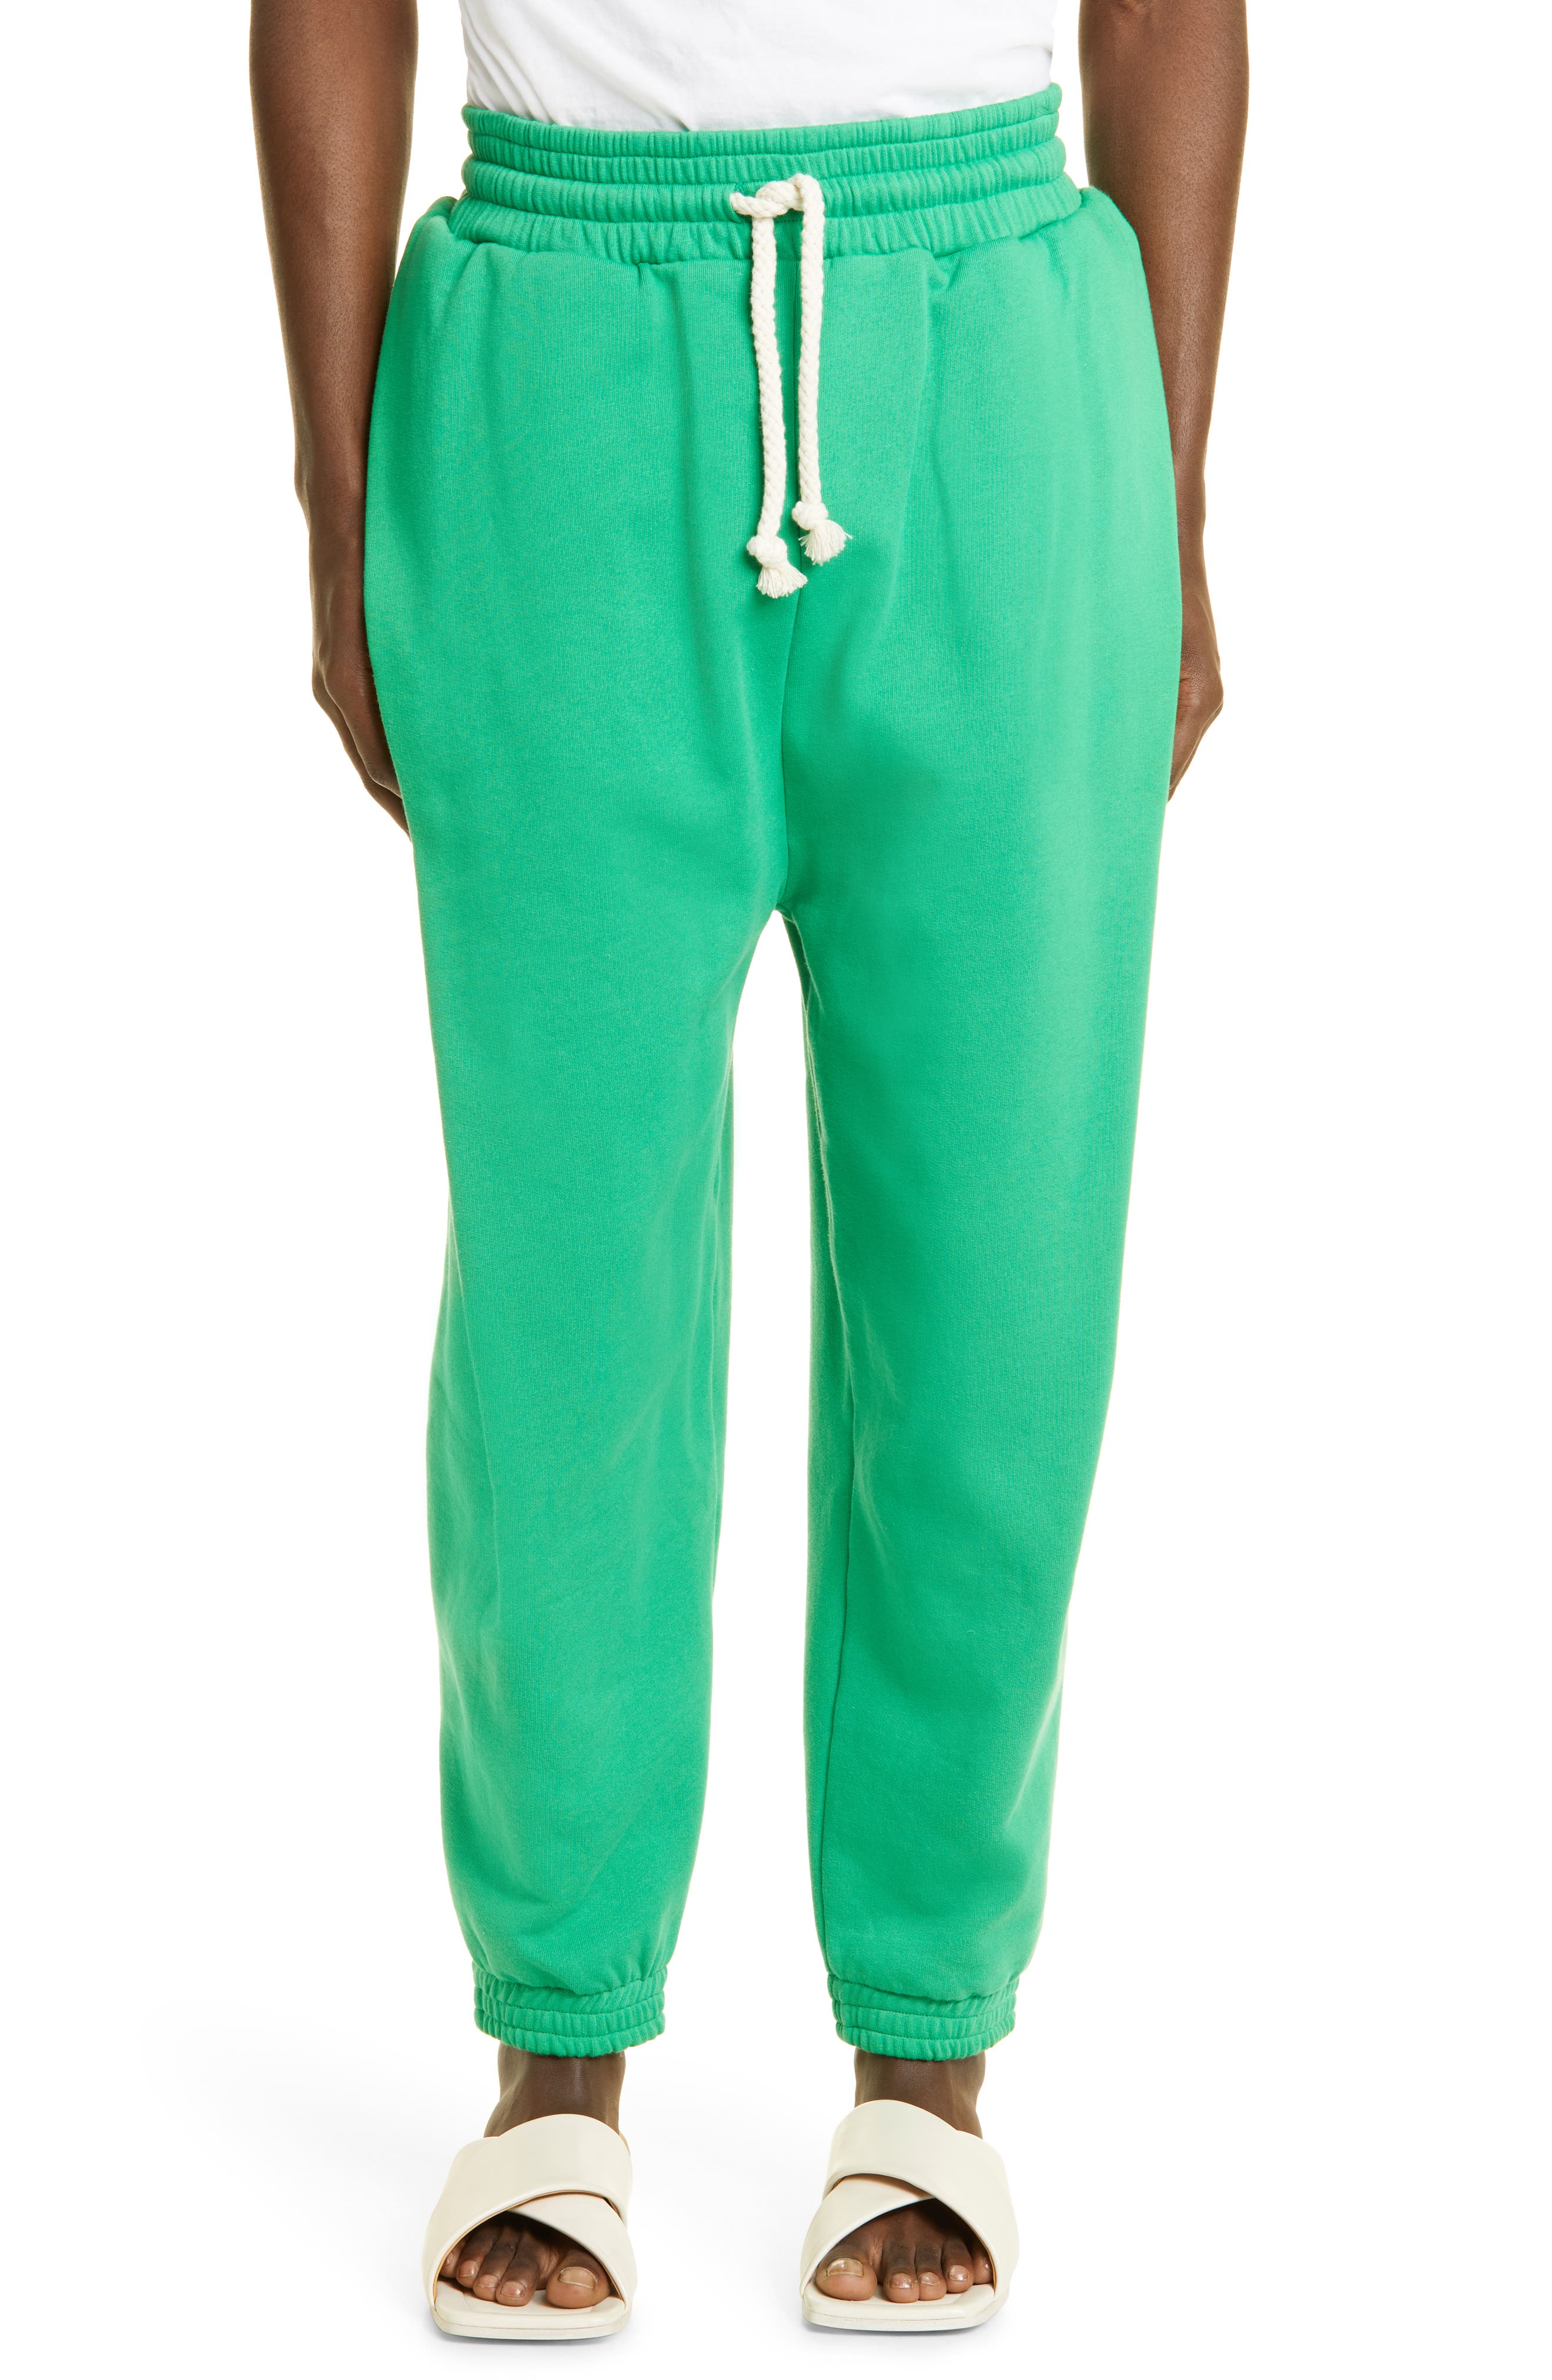 JW Anderson Baggy Tapered Sweatpants in Green at Nordstrom, Size Medium